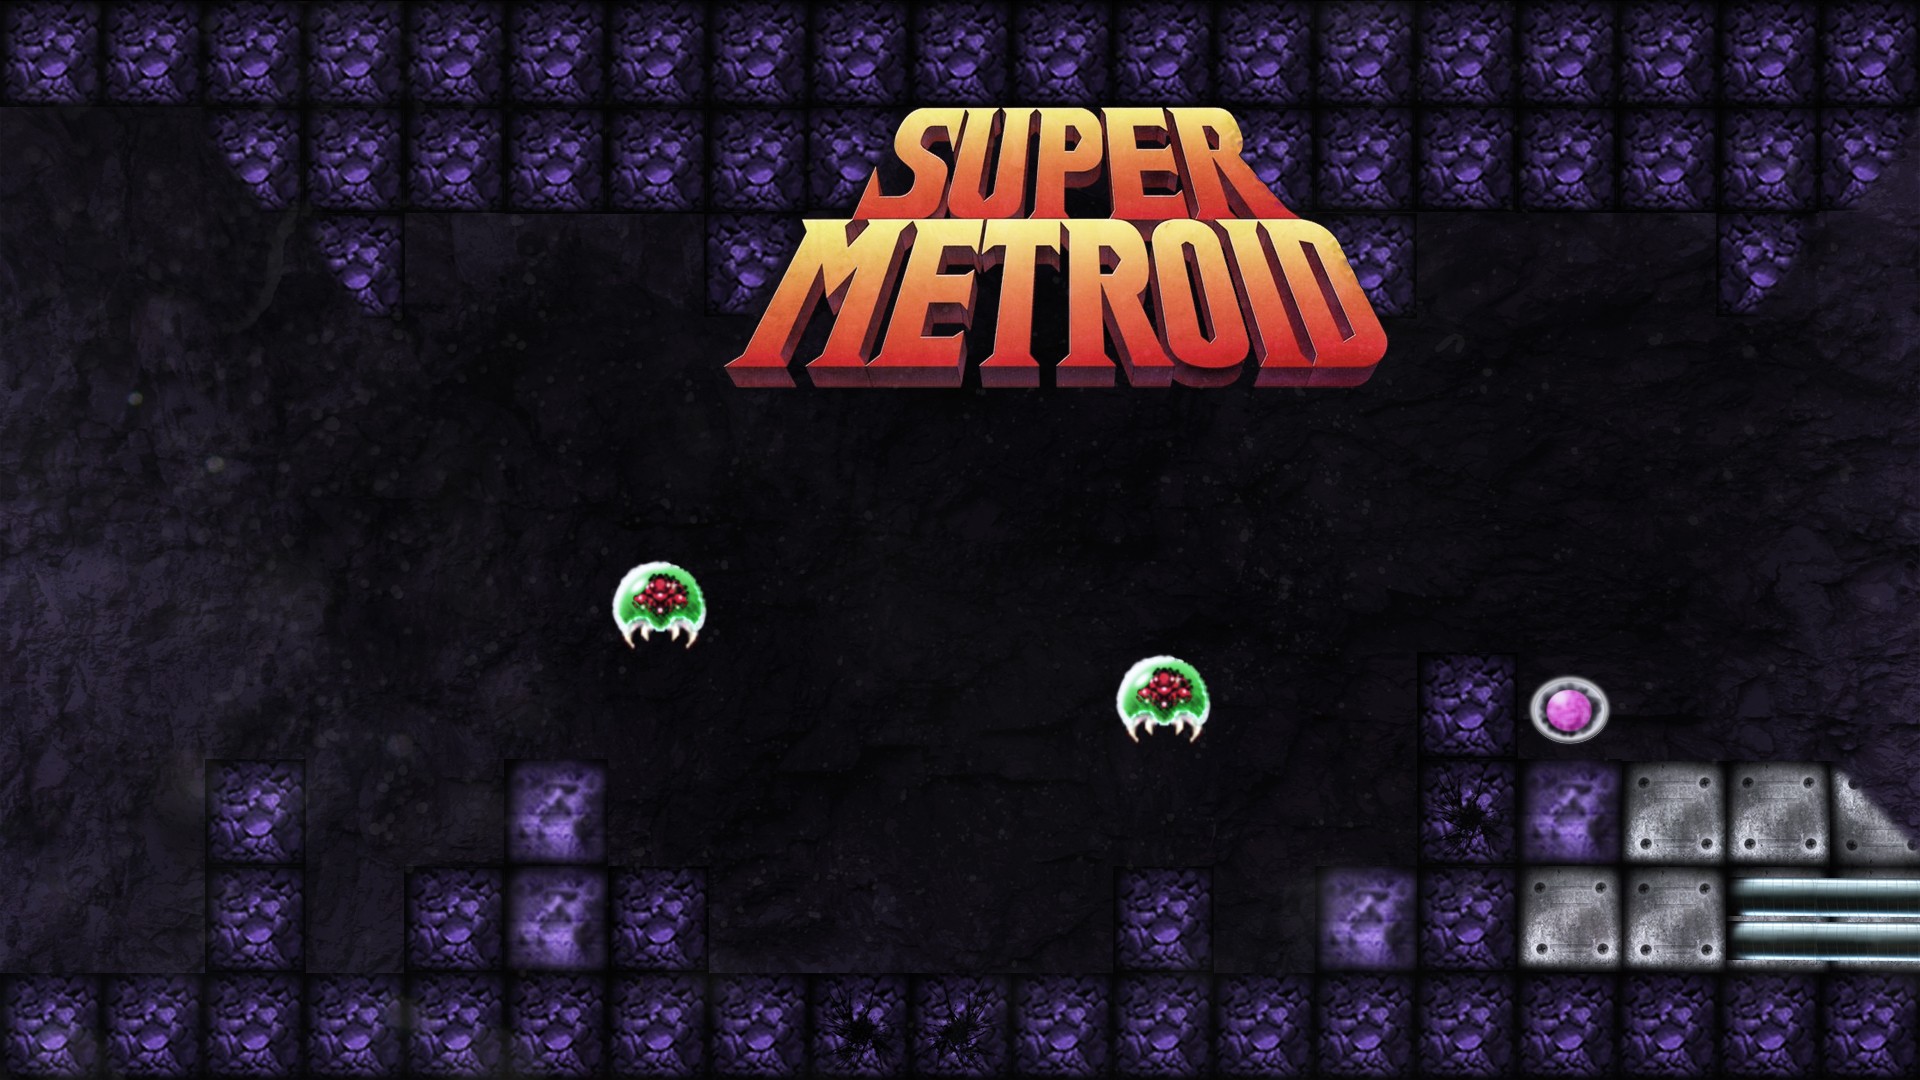 General 1920x1080 retro games video games Super Metroid science fiction video game art